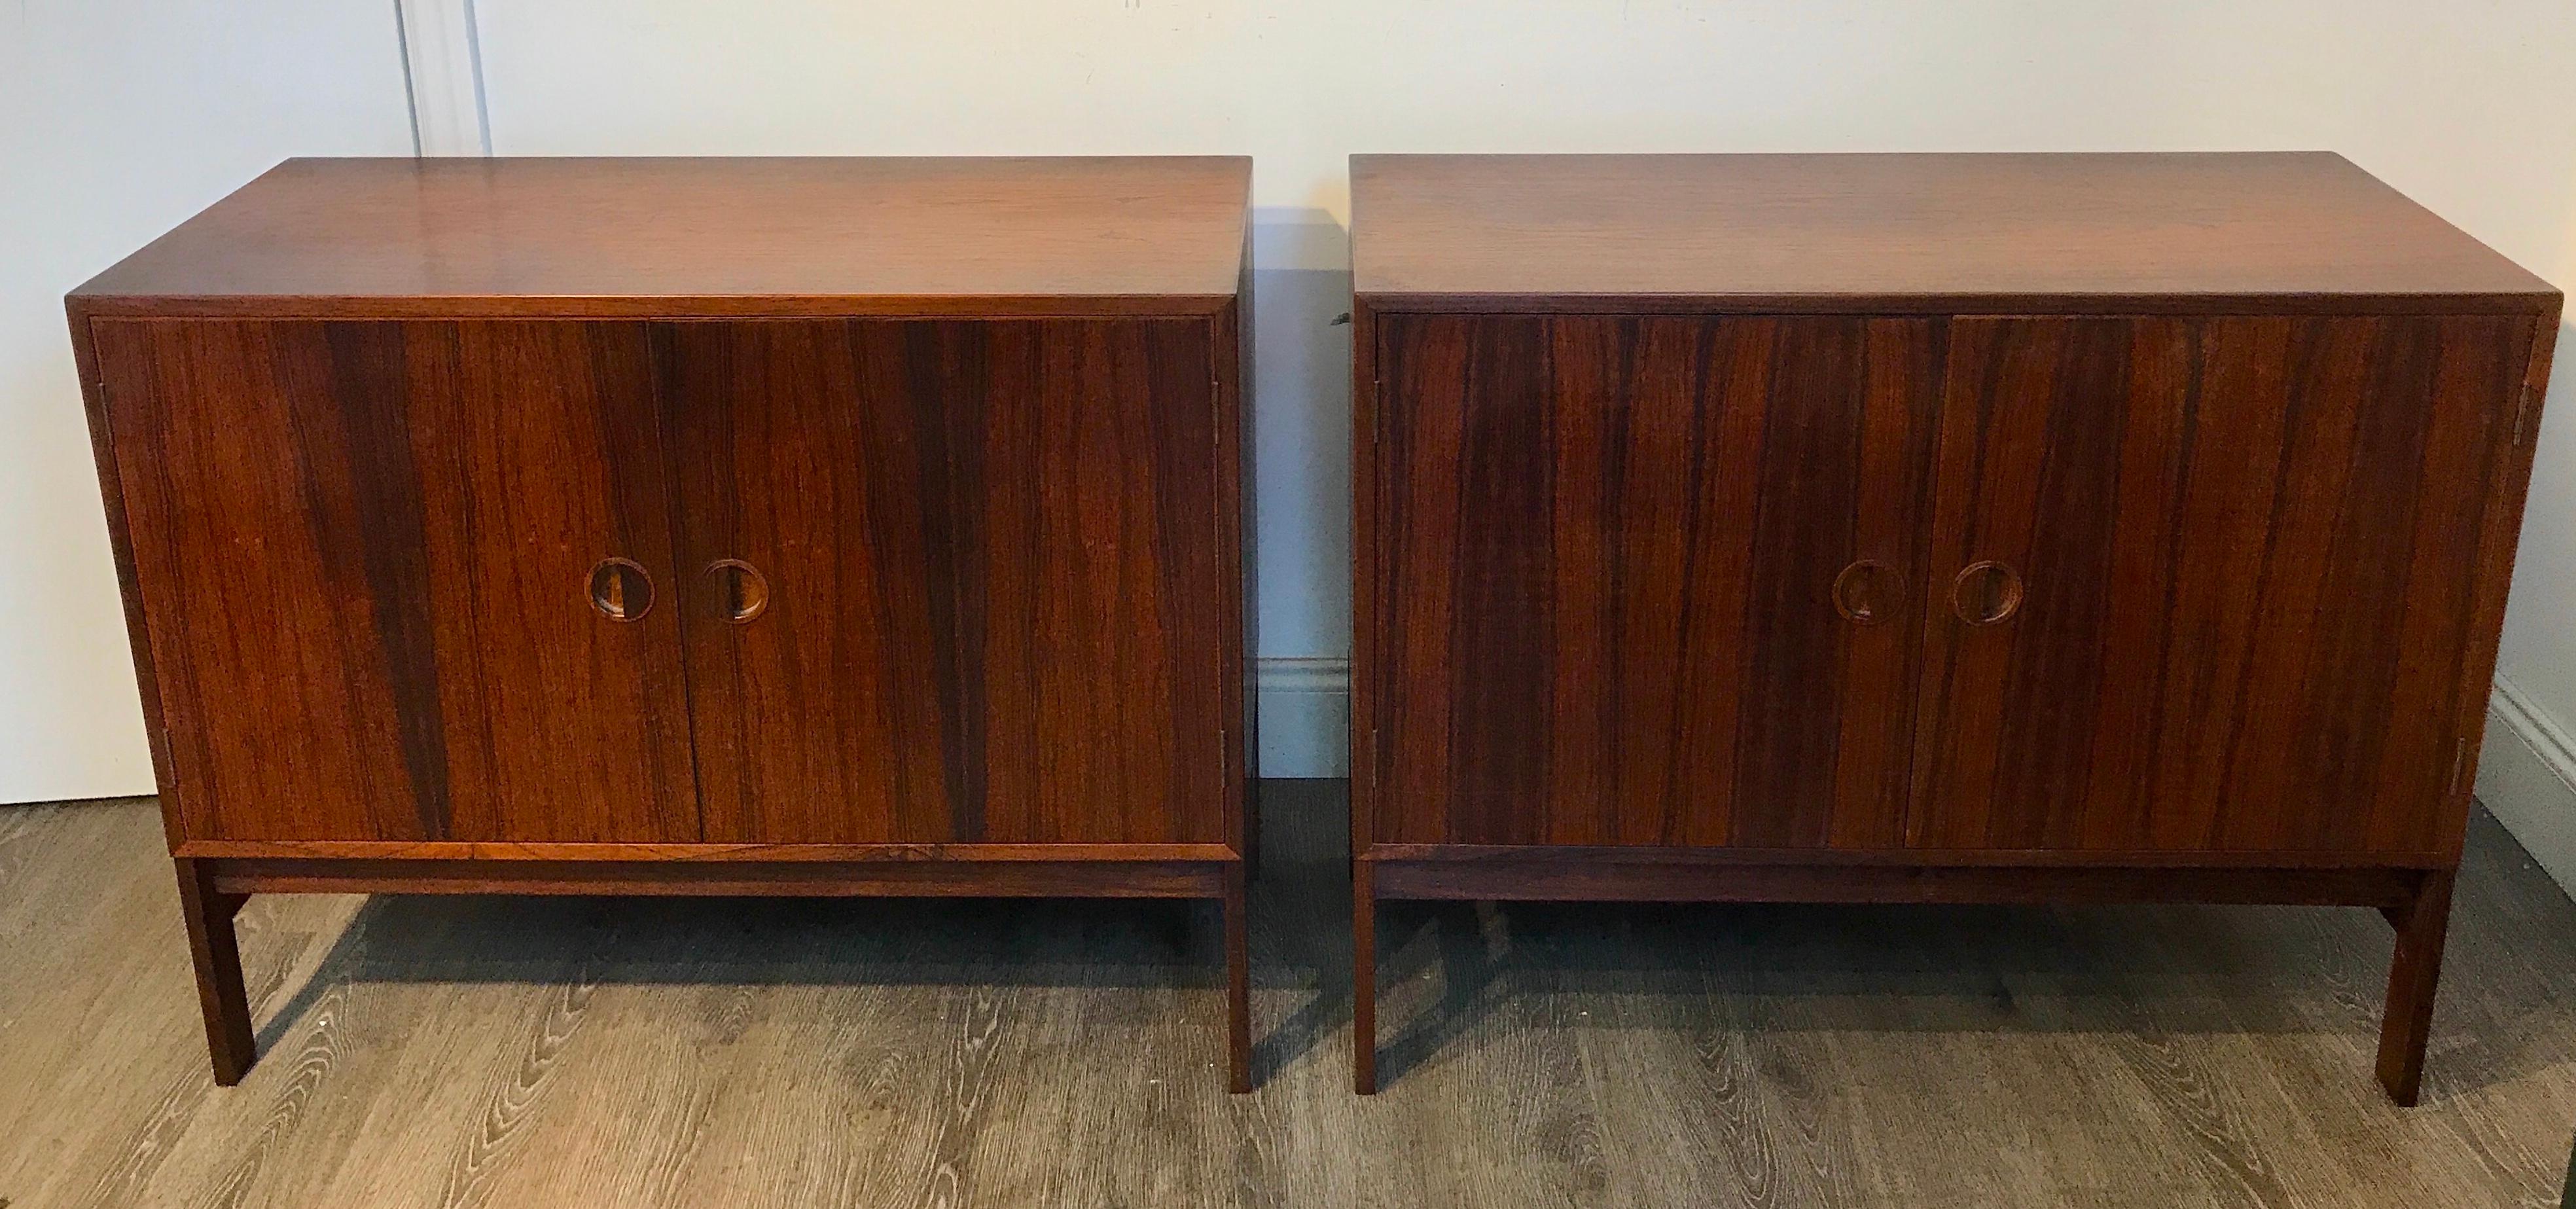 Two diminutive rosewood credenza designed by Ib Kofod-Larsen for Faarup Møbelfabrik, each fitted with two doors revealing a birch interior with two shelves that measure 16.5